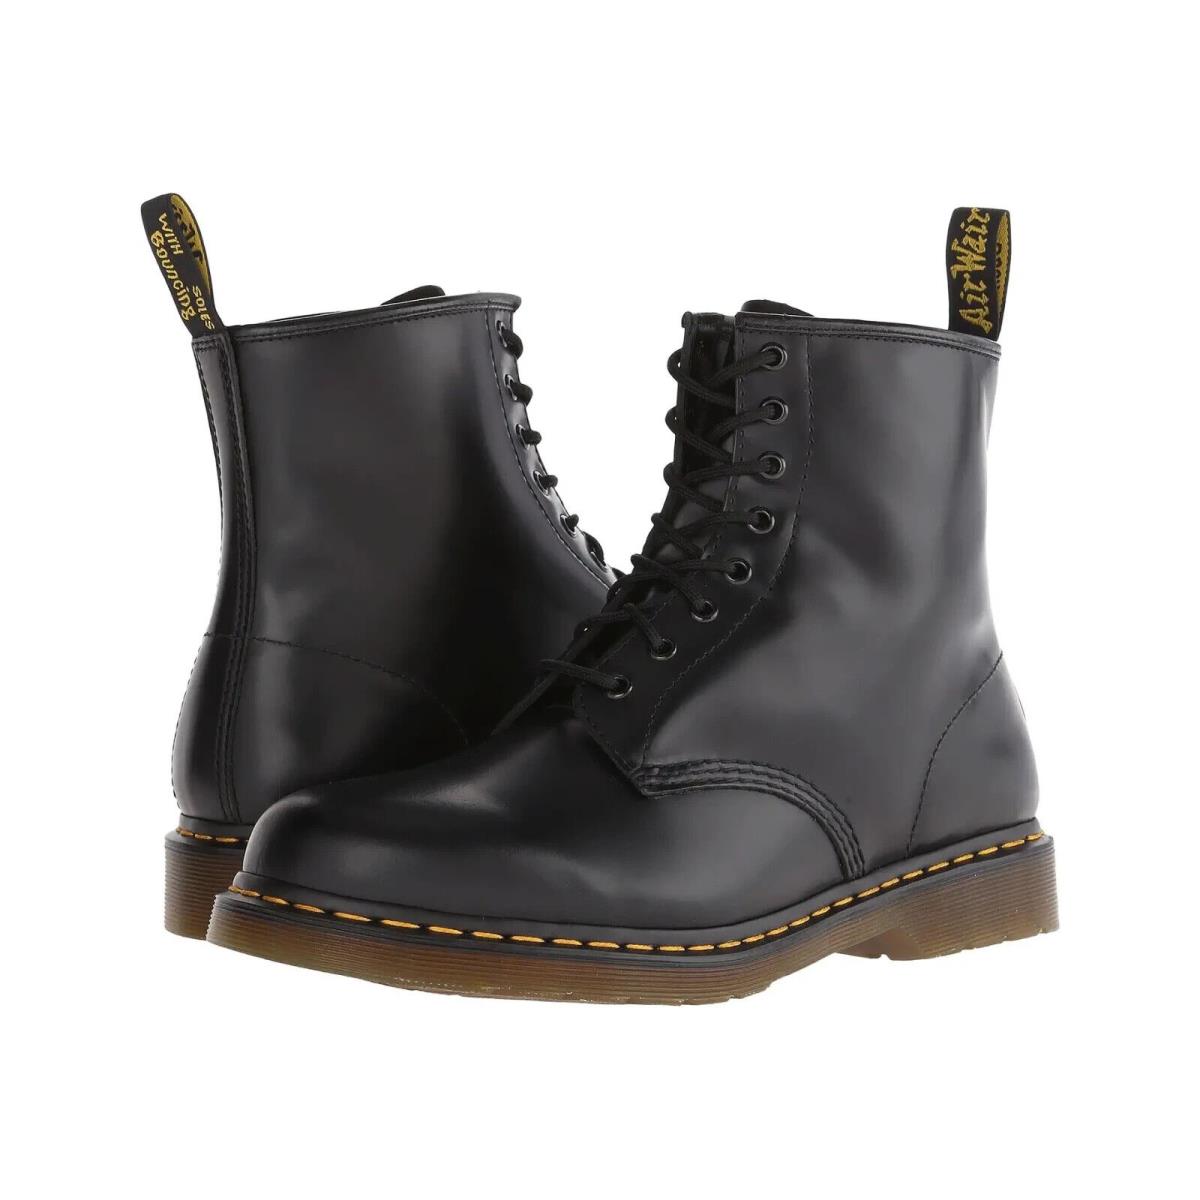 Dr. Martens N6068 Mens Black 8-Eye M Ankle-high Synthetic Boot Size US 12 EU 46